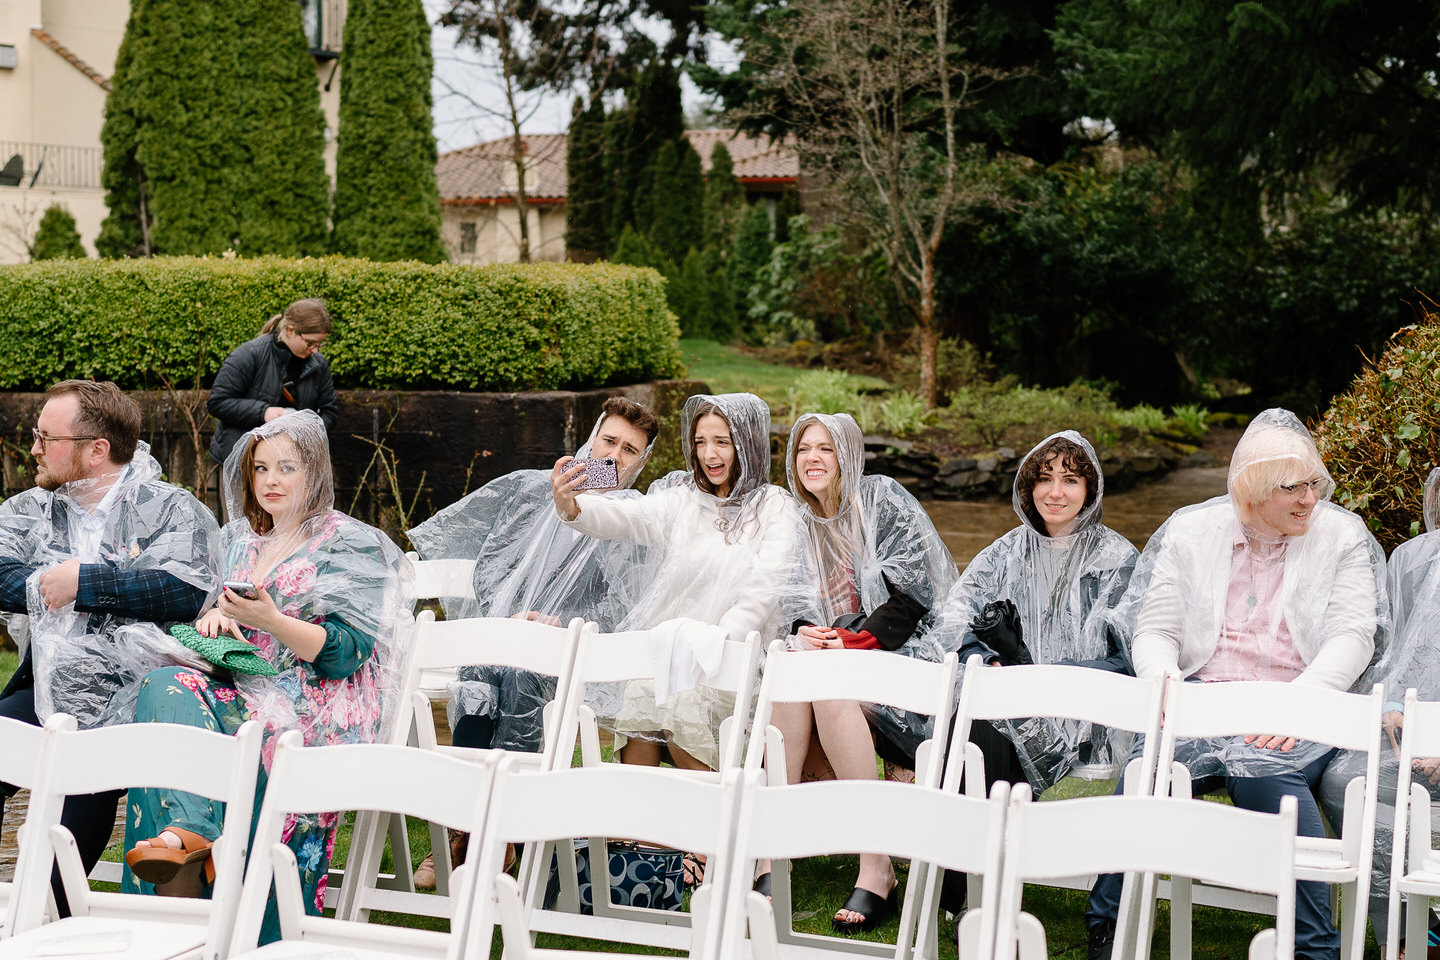 rainy wedding with guests wearing ponchos